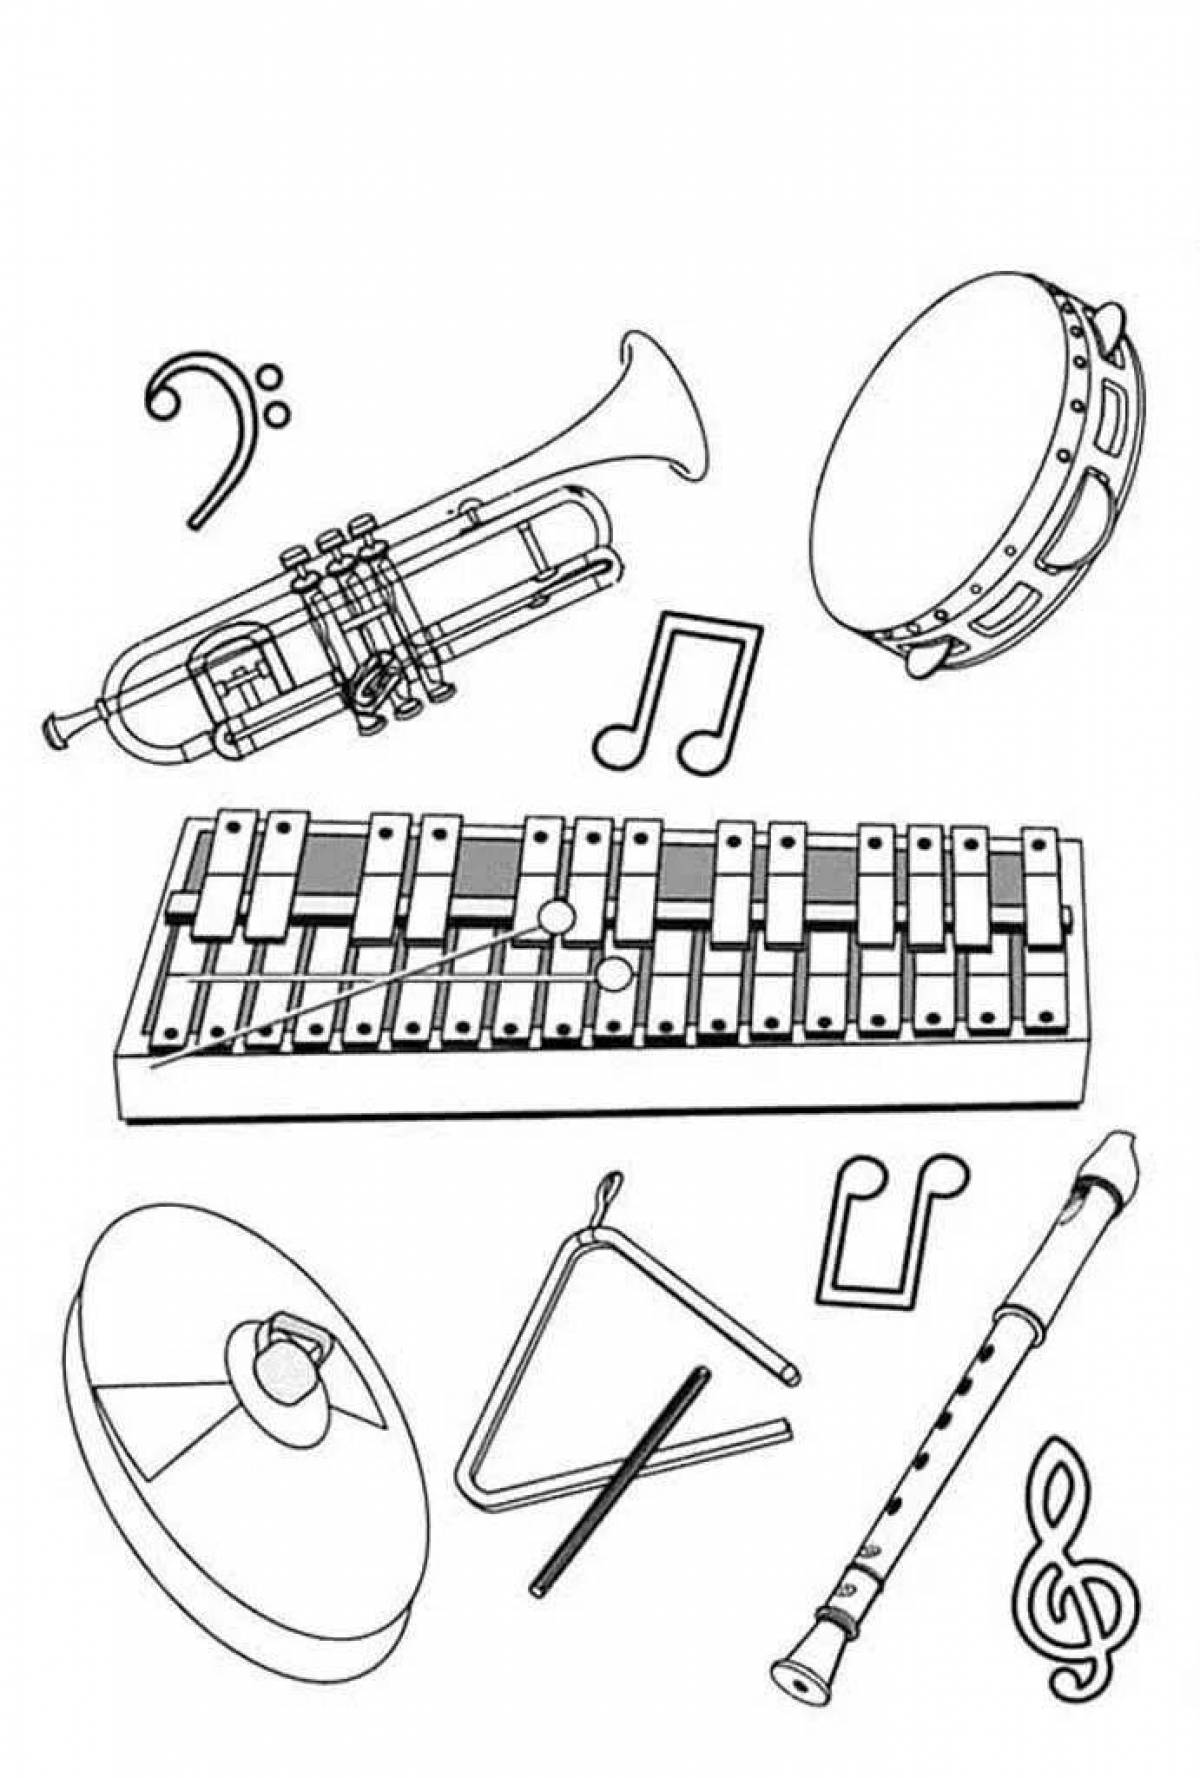 Coloring mystical musical instruments grade 1